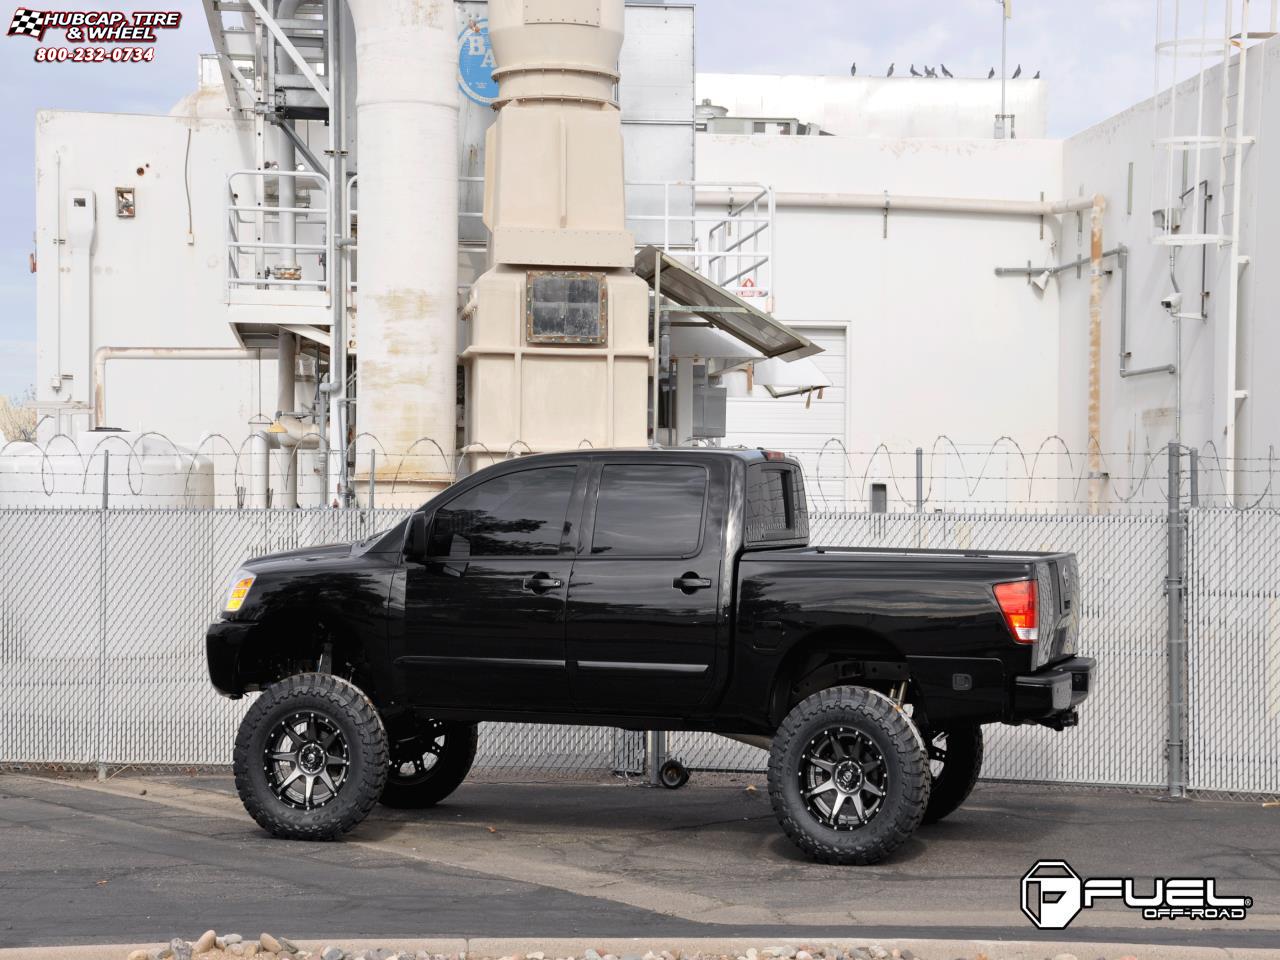 vehicle gallery/nissan titan fuel rampage d238 0X0  Anthracite center, gloss black lip wheels and rims